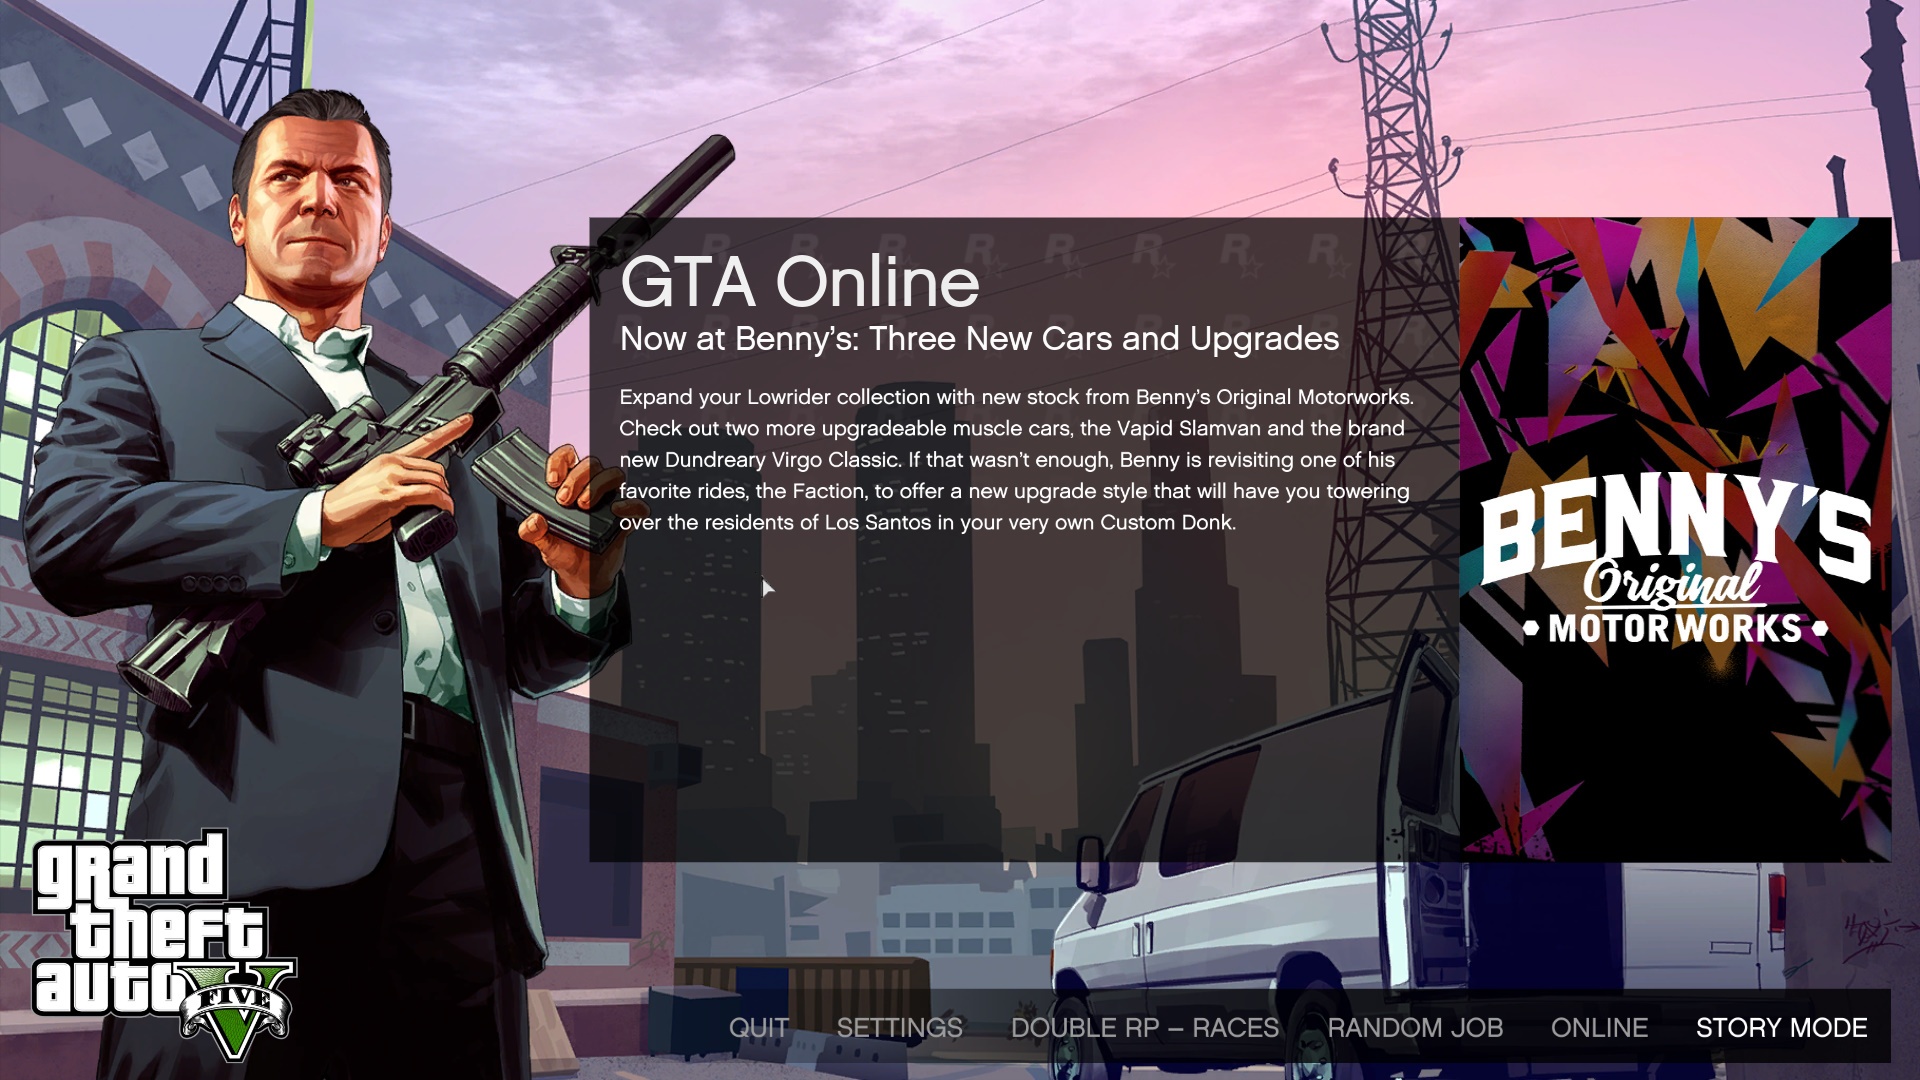 Gta 5 patch download fails at the end of downloading youtube